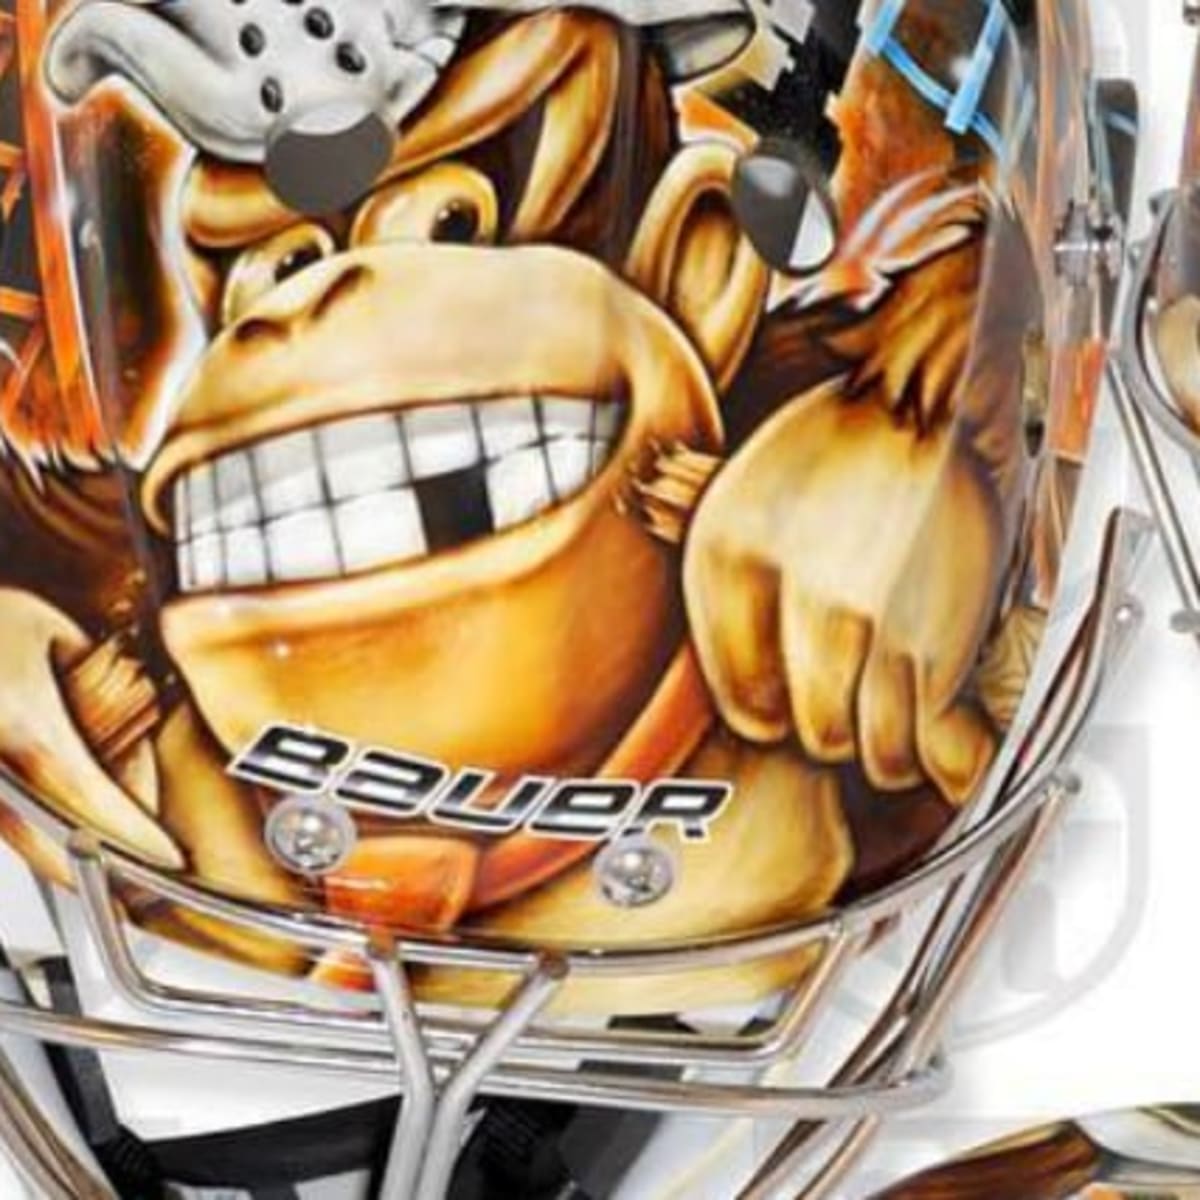 John Gibson's classic Donkey Kong-inspired mask is awesome - The Hockey News